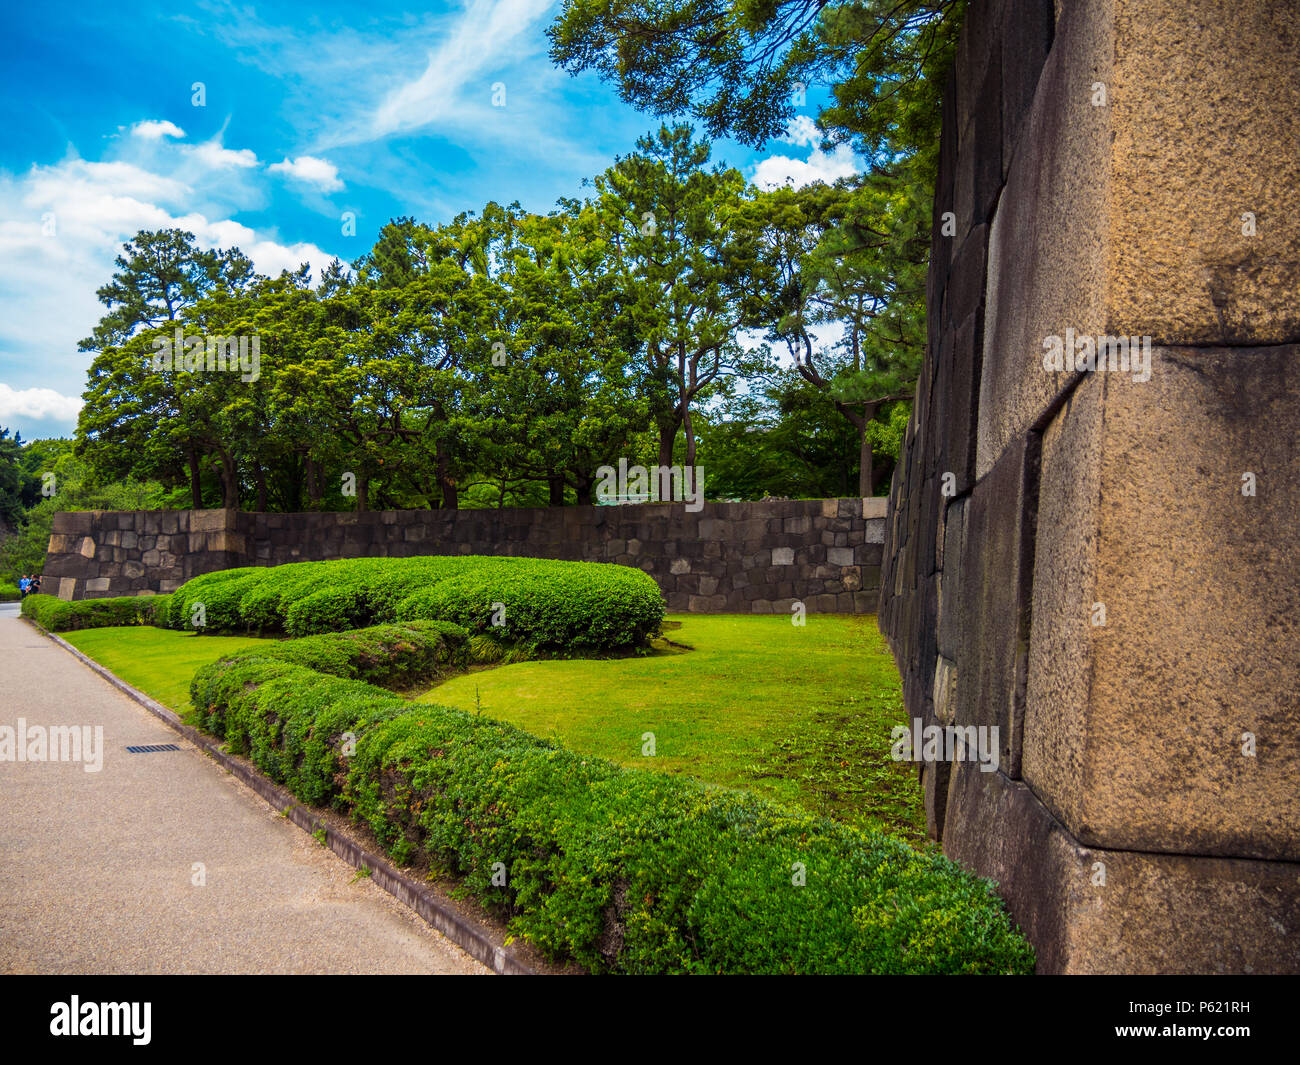 Imperial Palace East Gardens in Tokyo Stock Photo